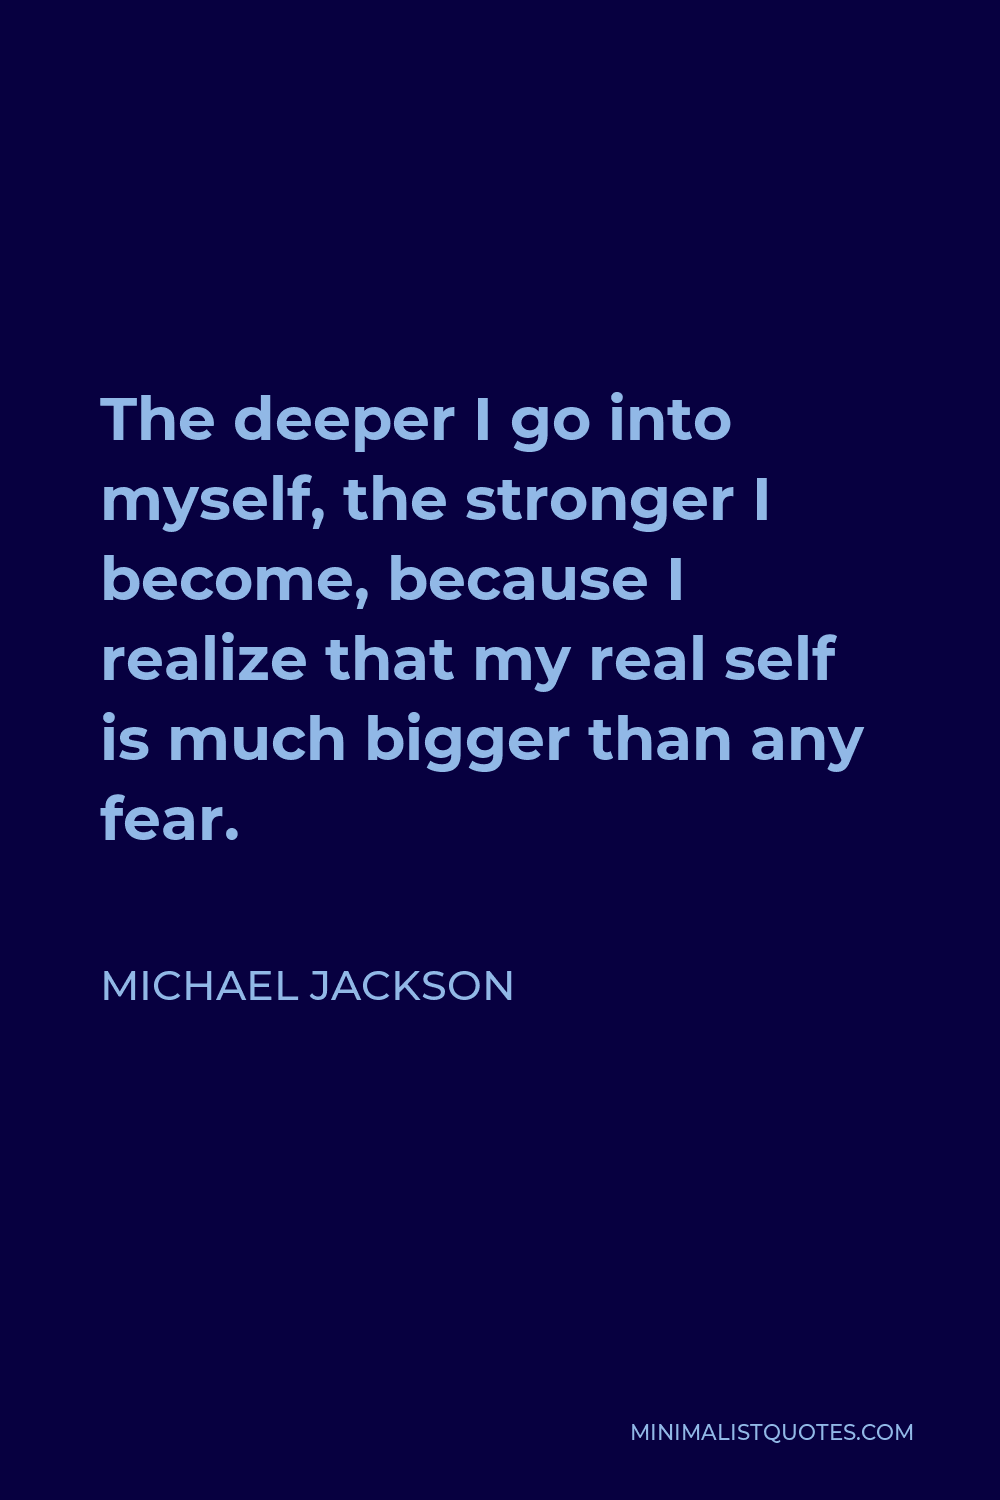 Michael Jackson Quote - The deeper I go into myself, the stronger I become, because I realize that my real self is much bigger than any fear.